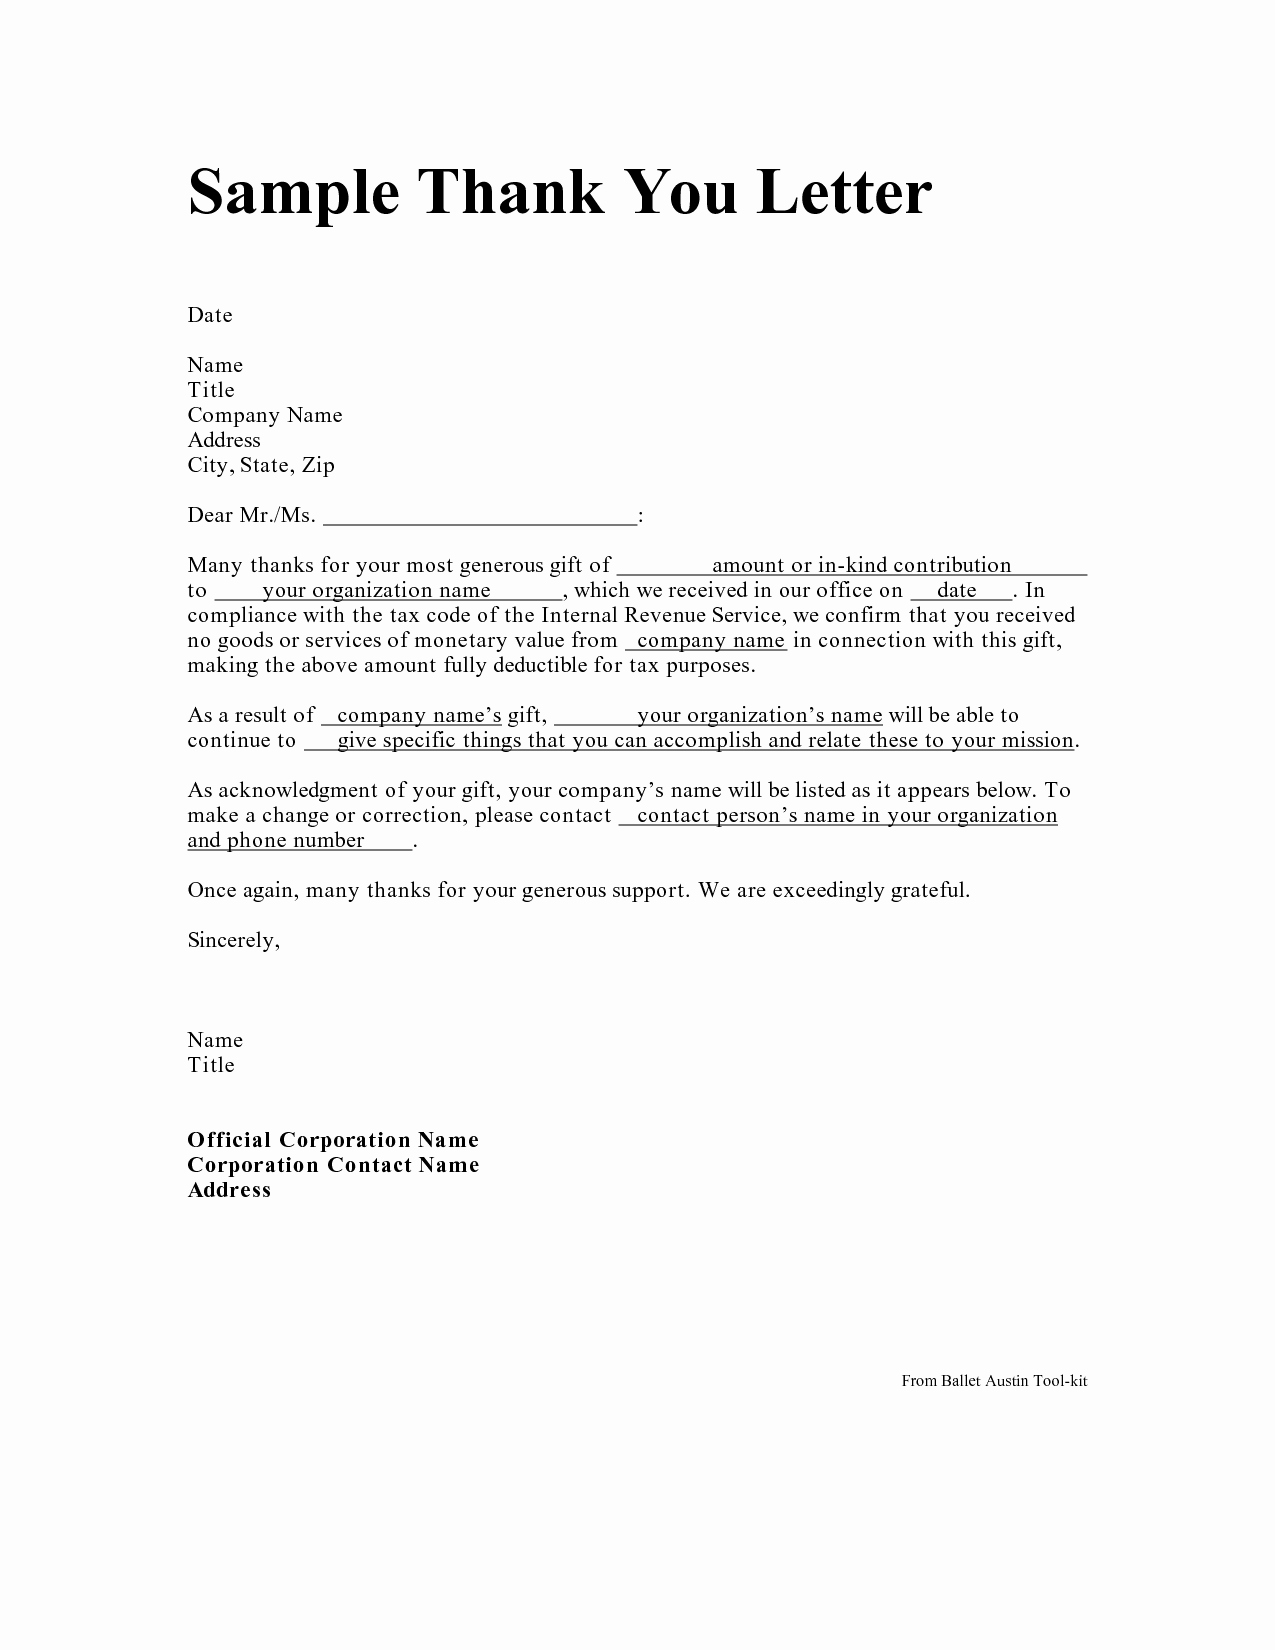 Thank You Letter Templates Awesome Personal Thank You Letter Personal Thank You Letter